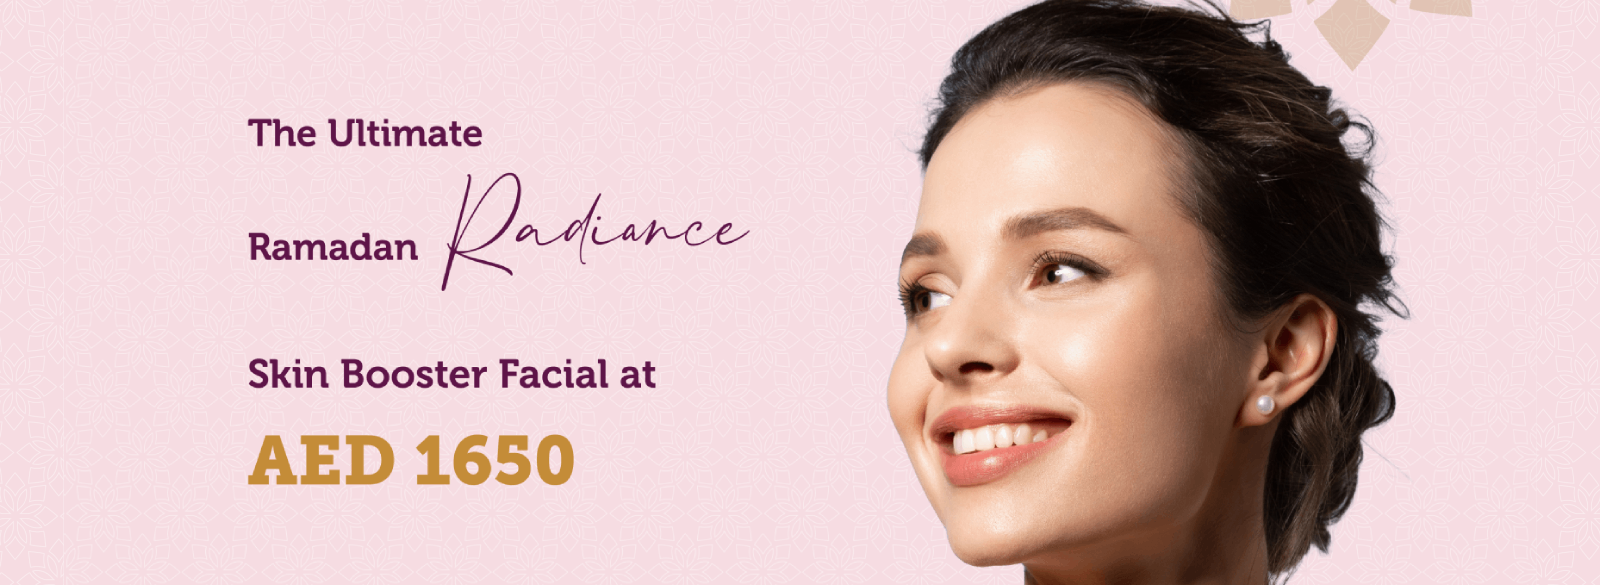 Skin Booster Facial – AED 1650